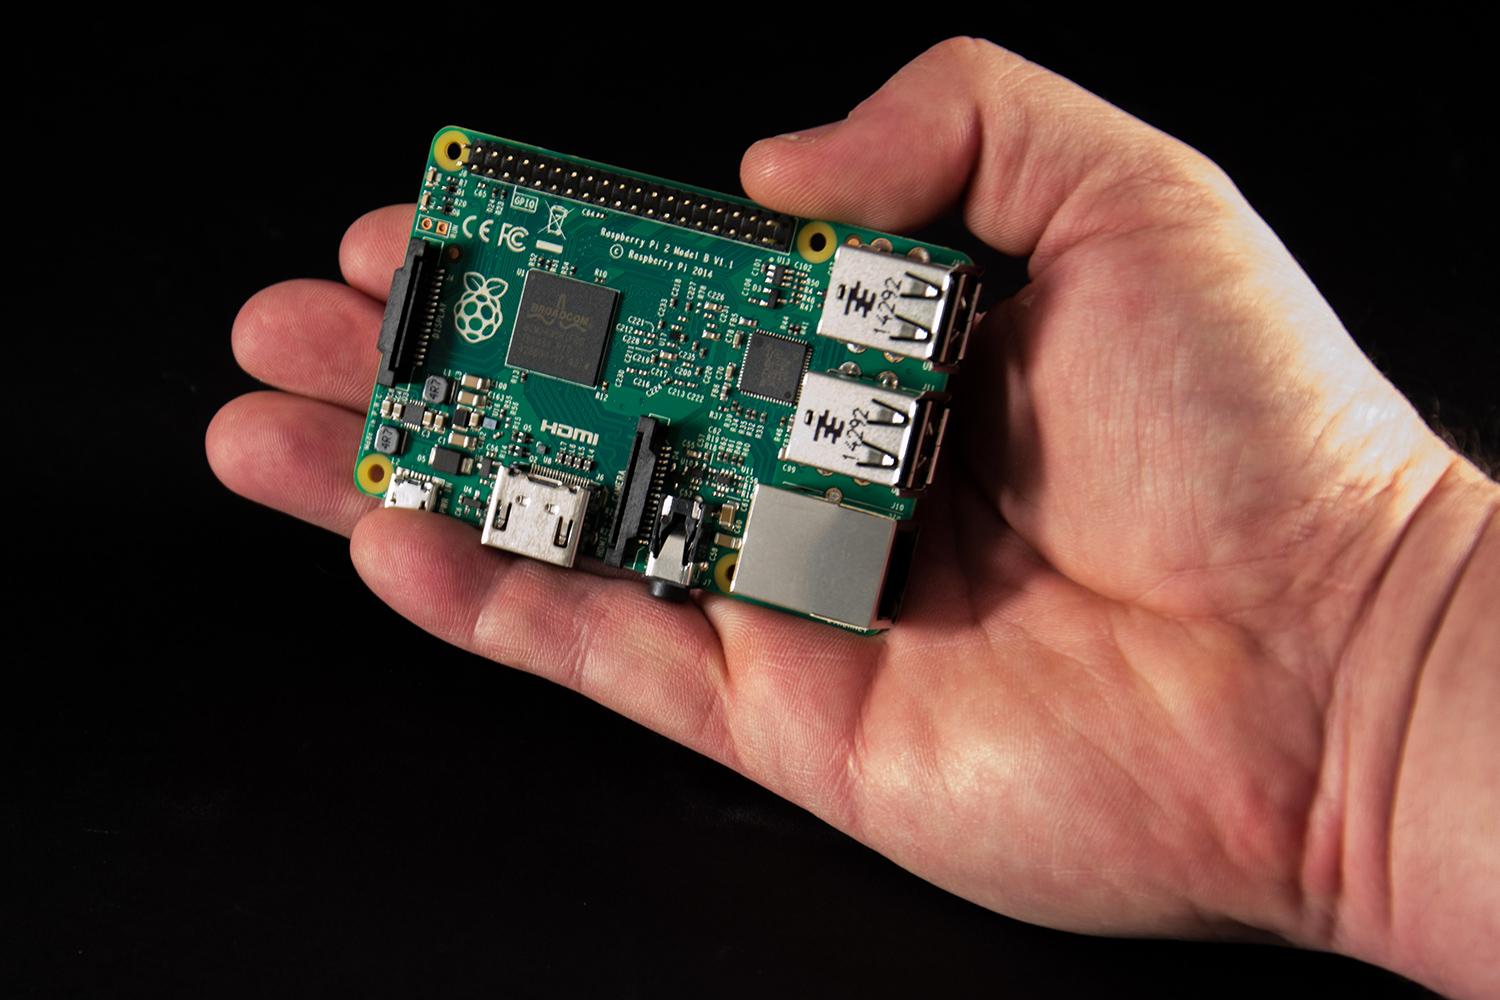 Raspberry Pi 2 Hands On Review: More than a hobby?